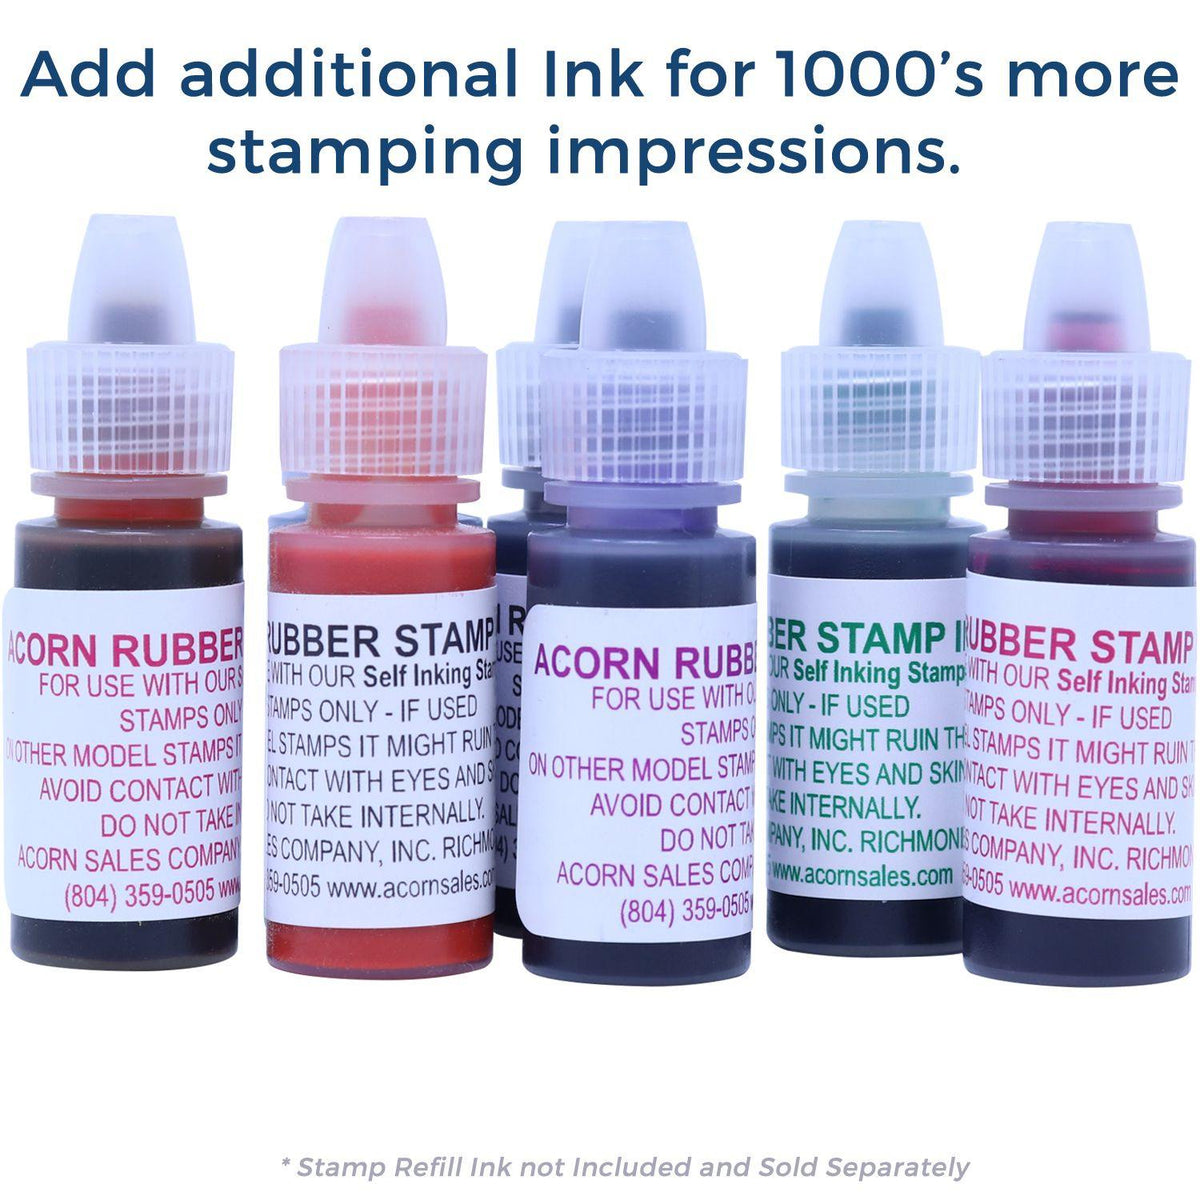 Slim Pre Inked Please Finish At Home And Return To Teacher Stamp - Engineer Seal Stamps - Brand_Slim, Impression Size_Small, Stamp Type_Pre-Inked Stamp, Type of Use_Teacher